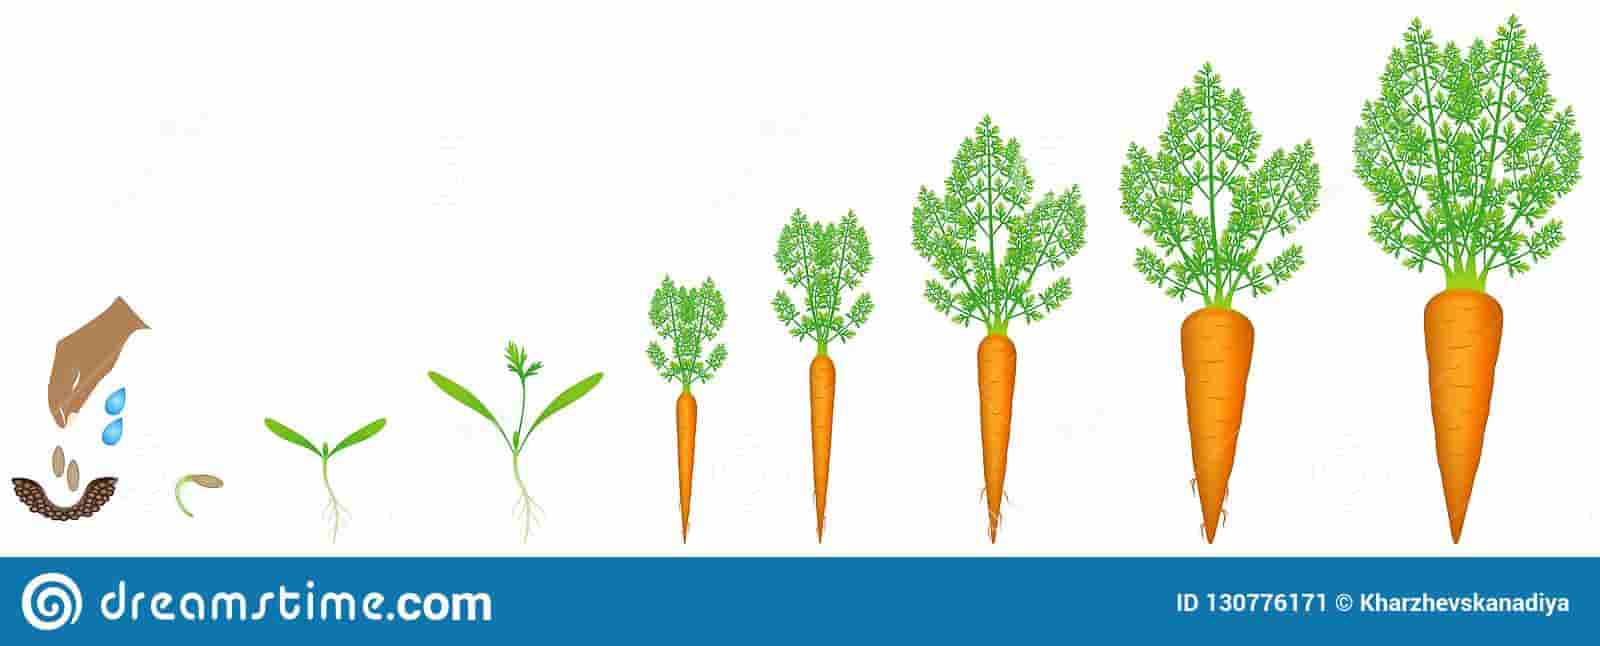 stages-growth-carrot-white-background-beautiful-illustration-130776171